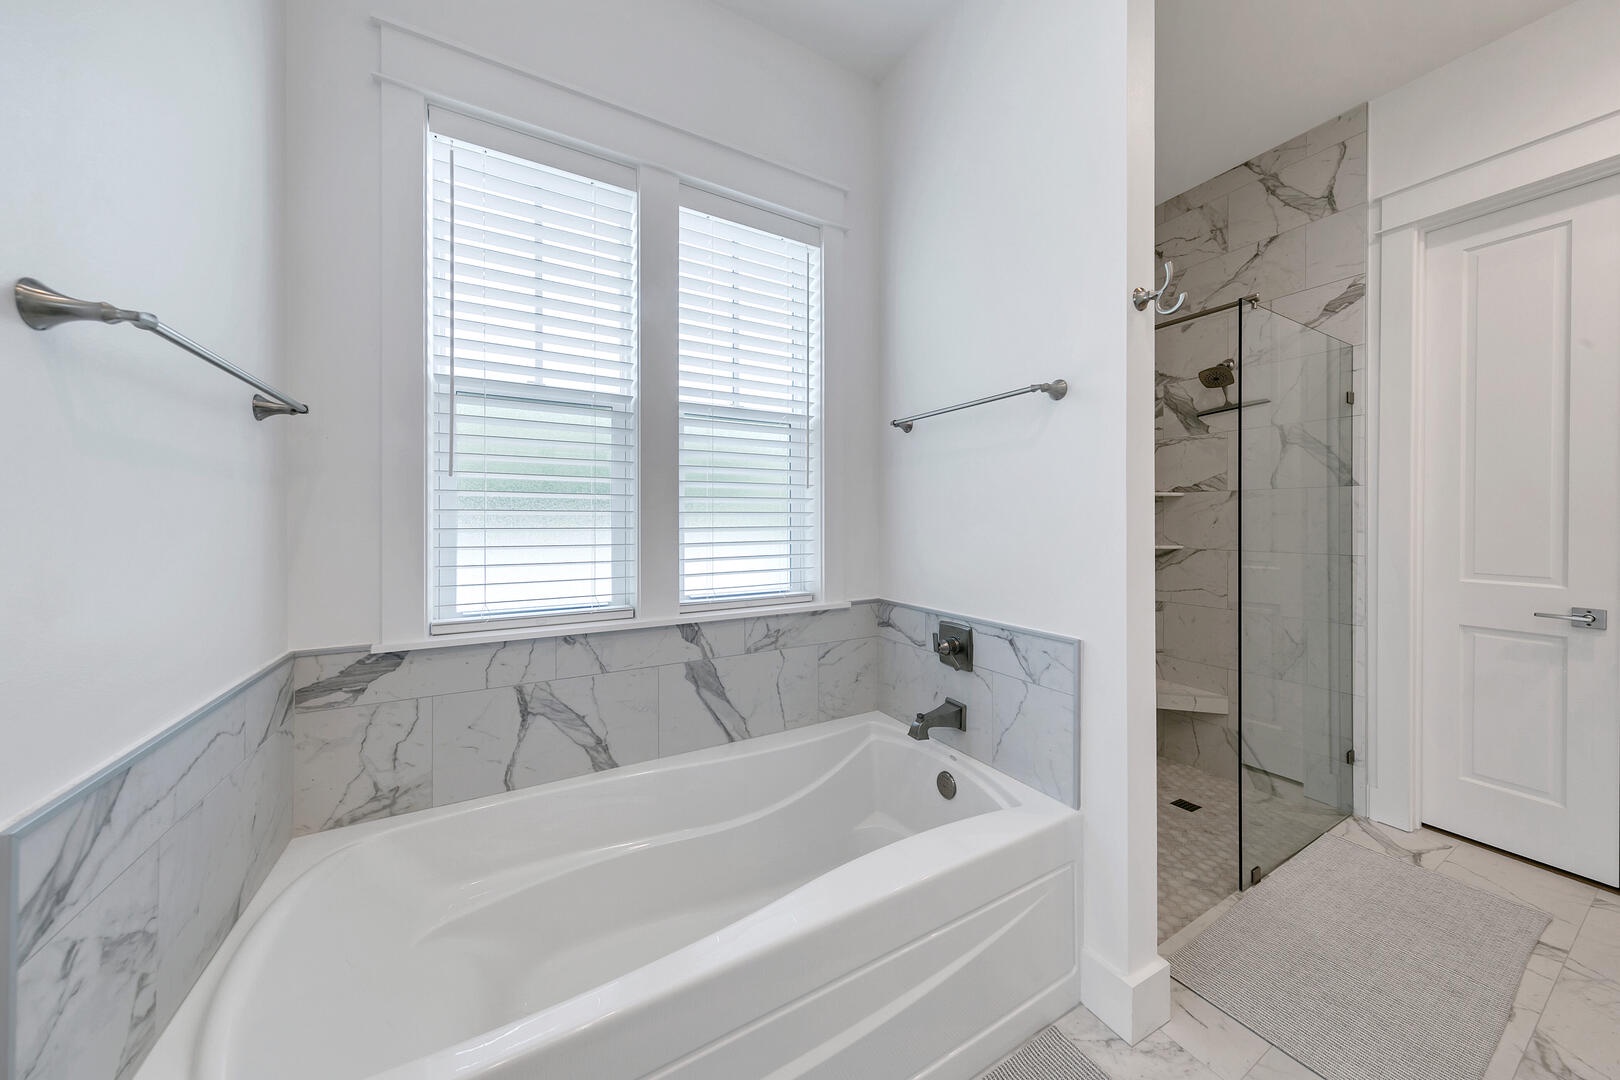 The master bath with walk-in shower, and soaking tub!